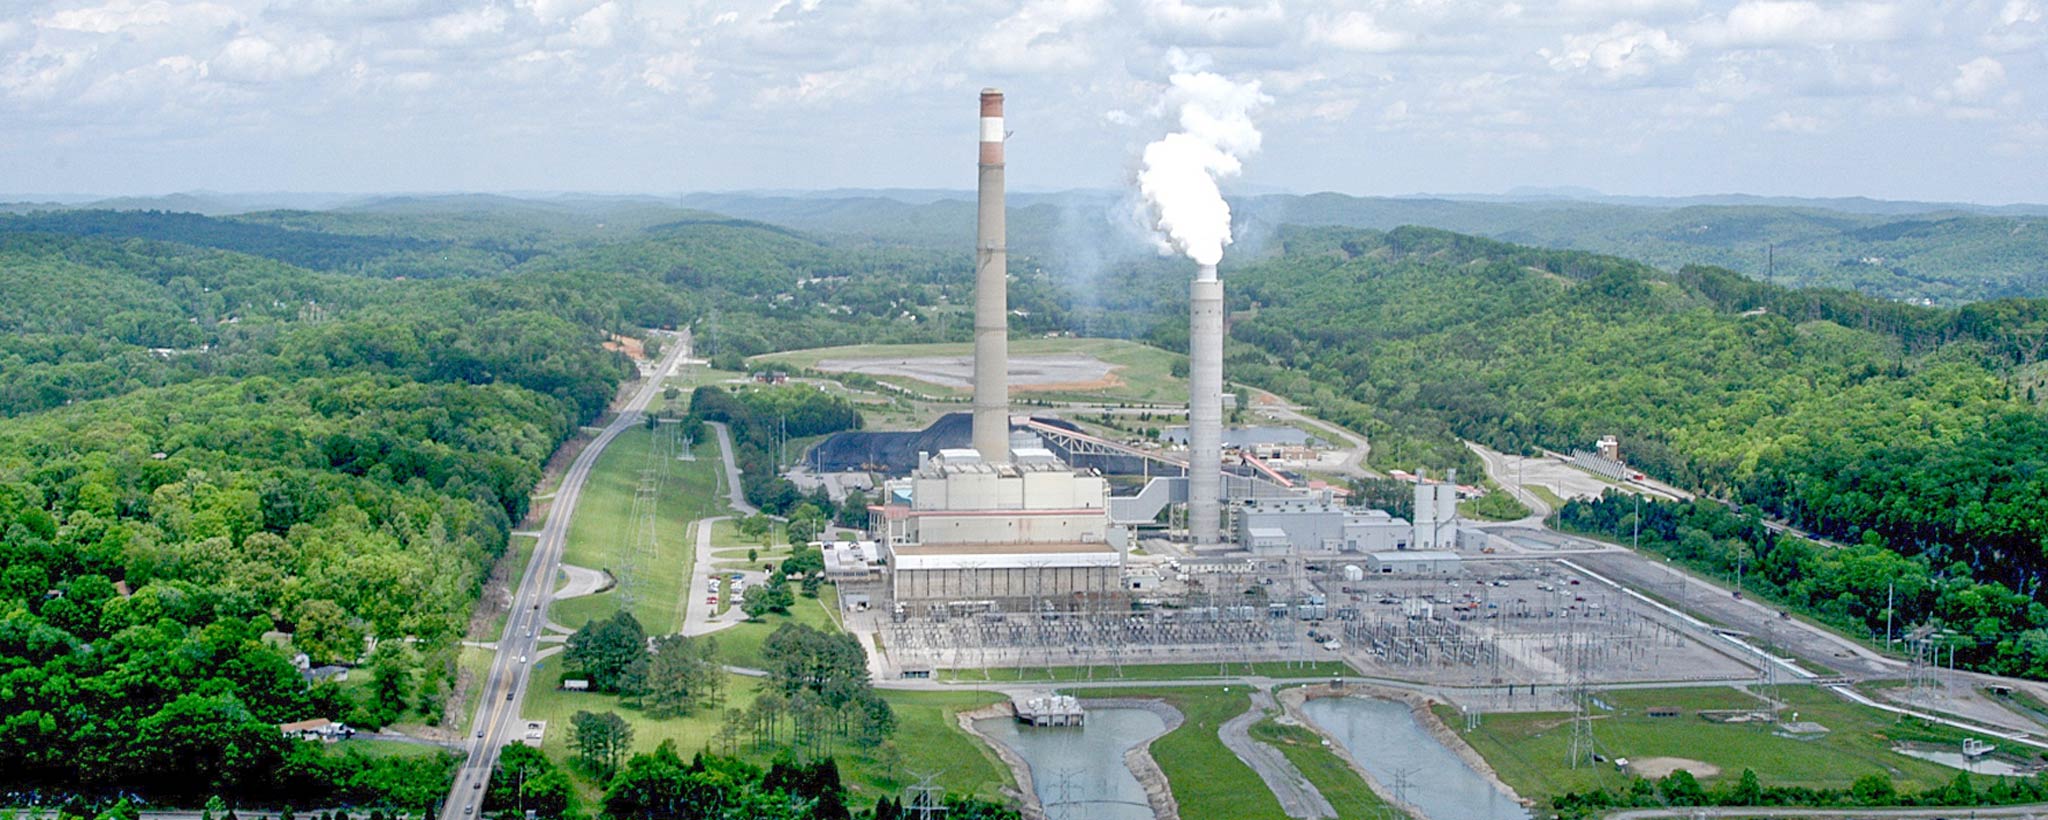 An aerial view of Bull Run Fossil Plant